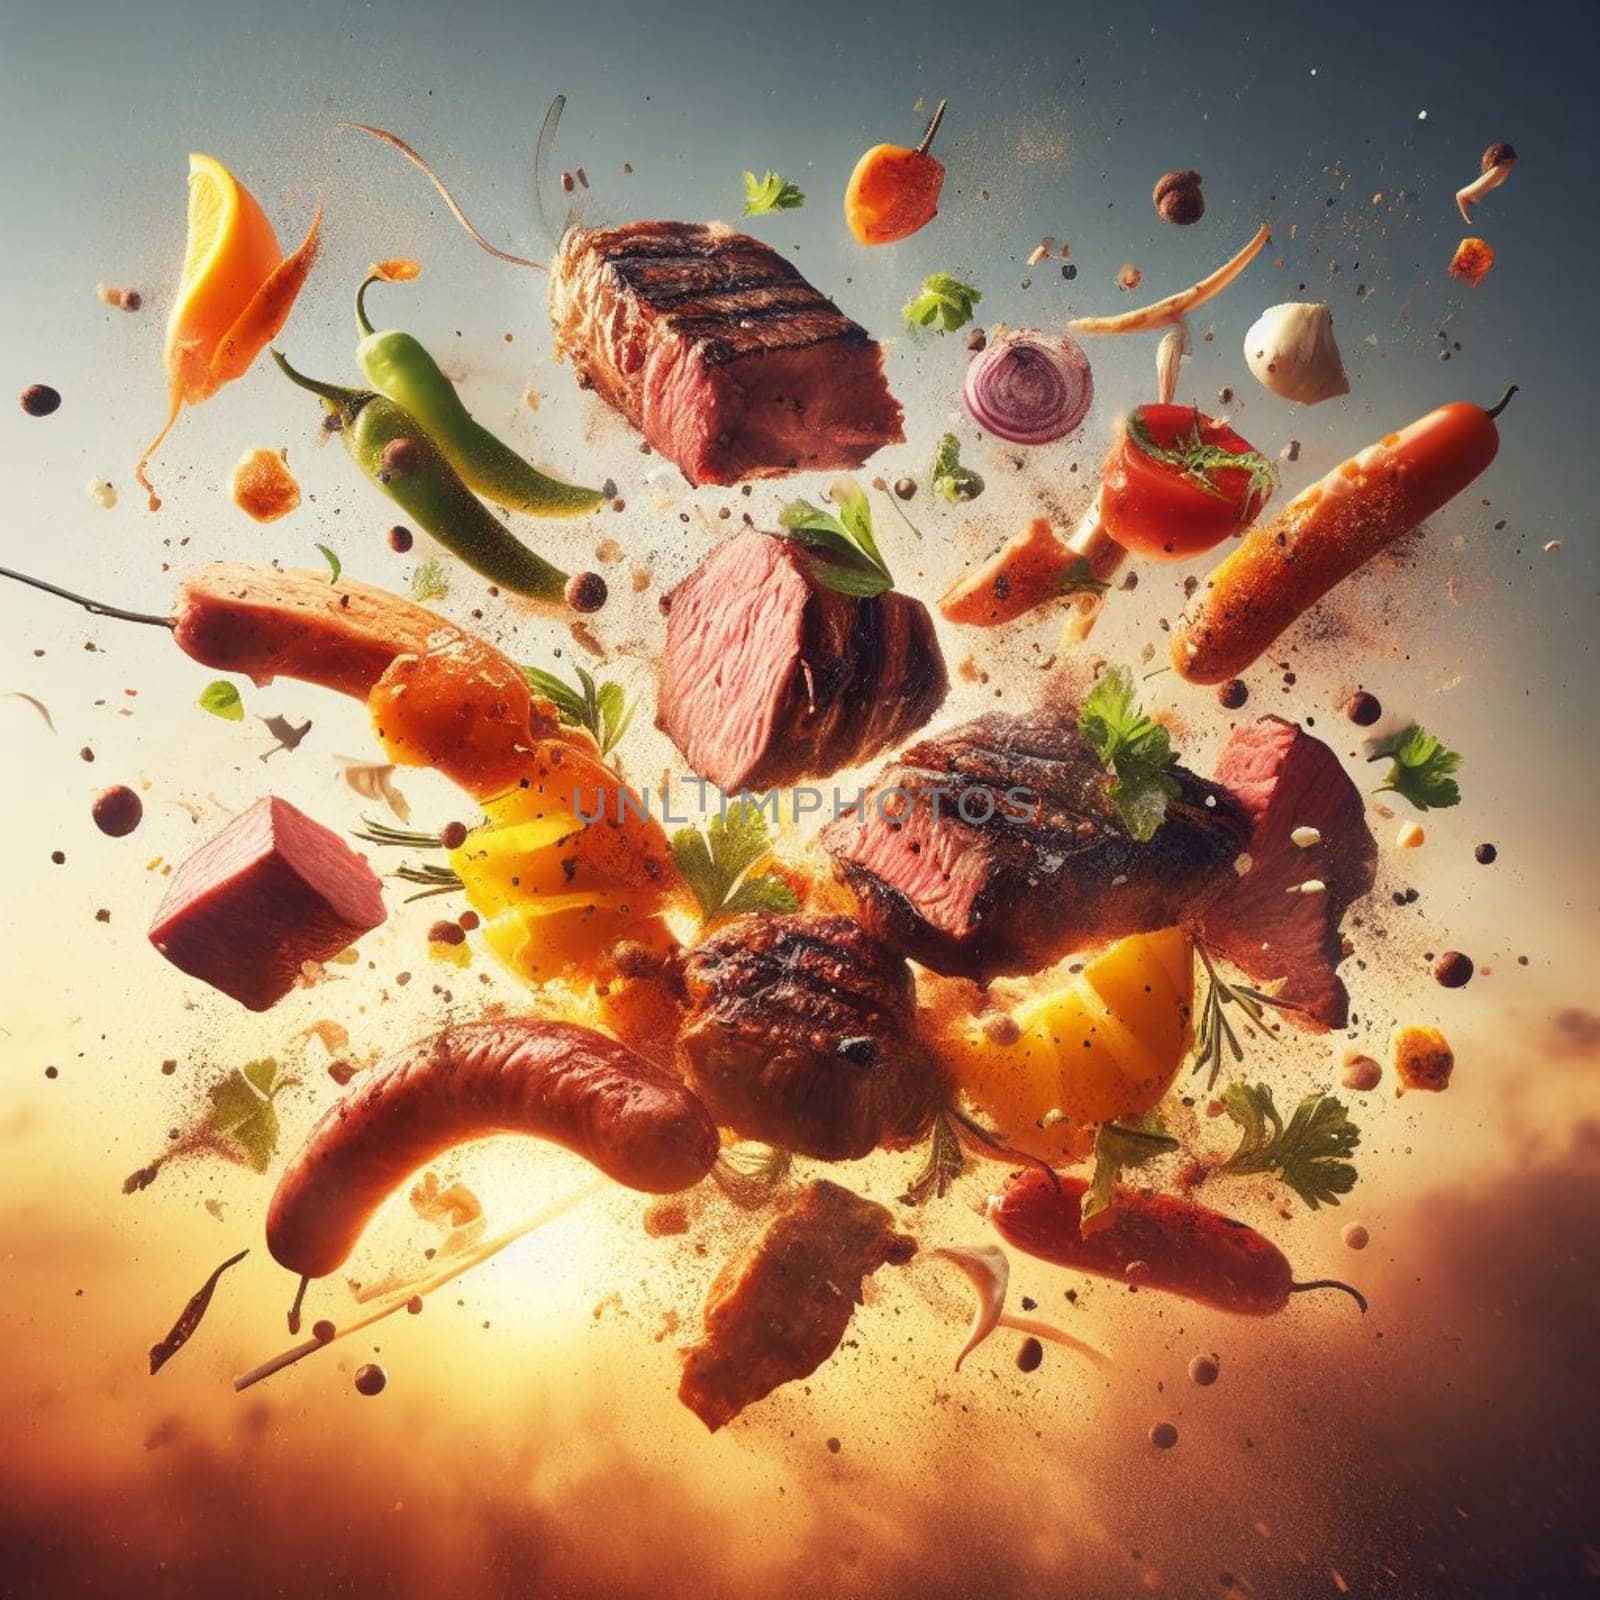 meat barbacue flying pieces of meat and veggies , splahing sauces, sunset golden light by verbano